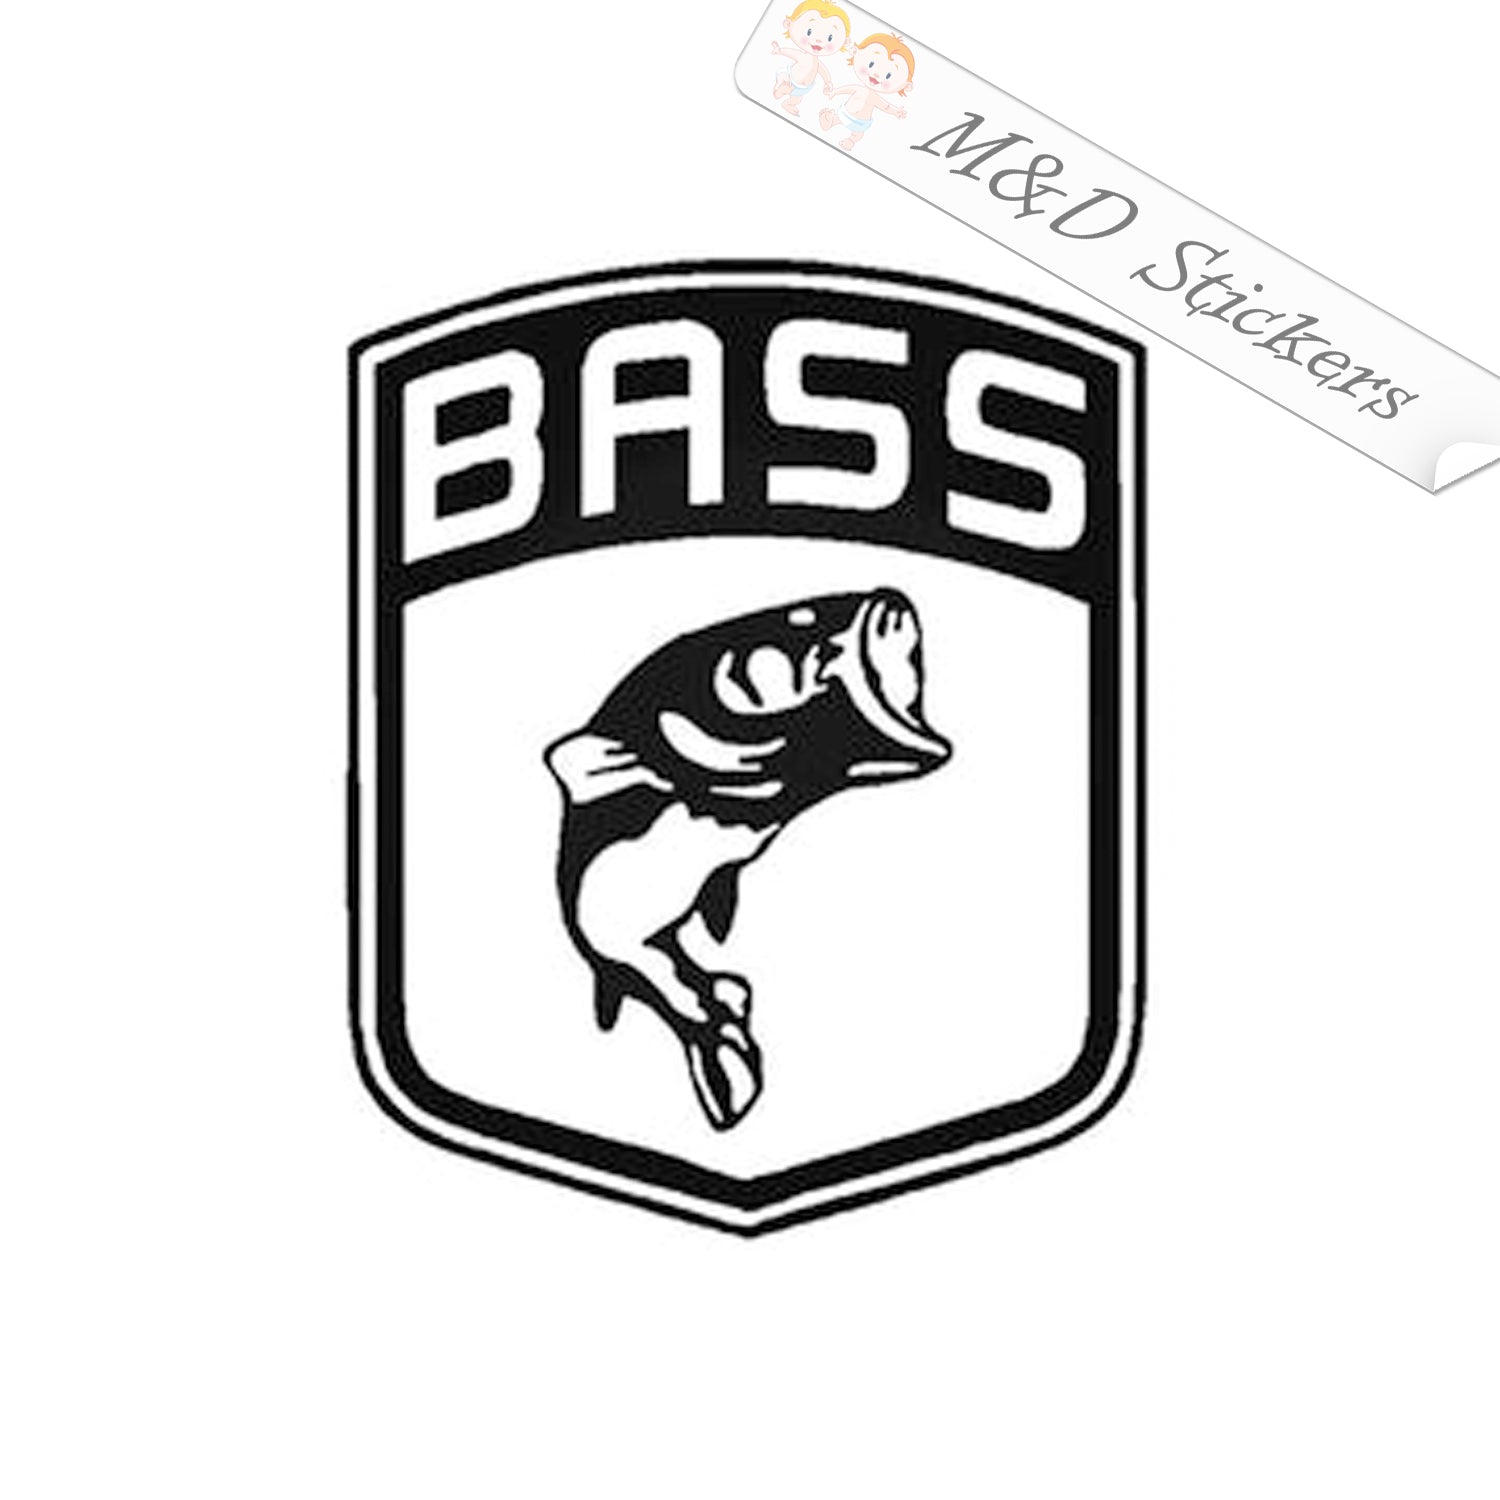 Bass fish badge (4.5 - 30) Vinyl Decal in Different colors